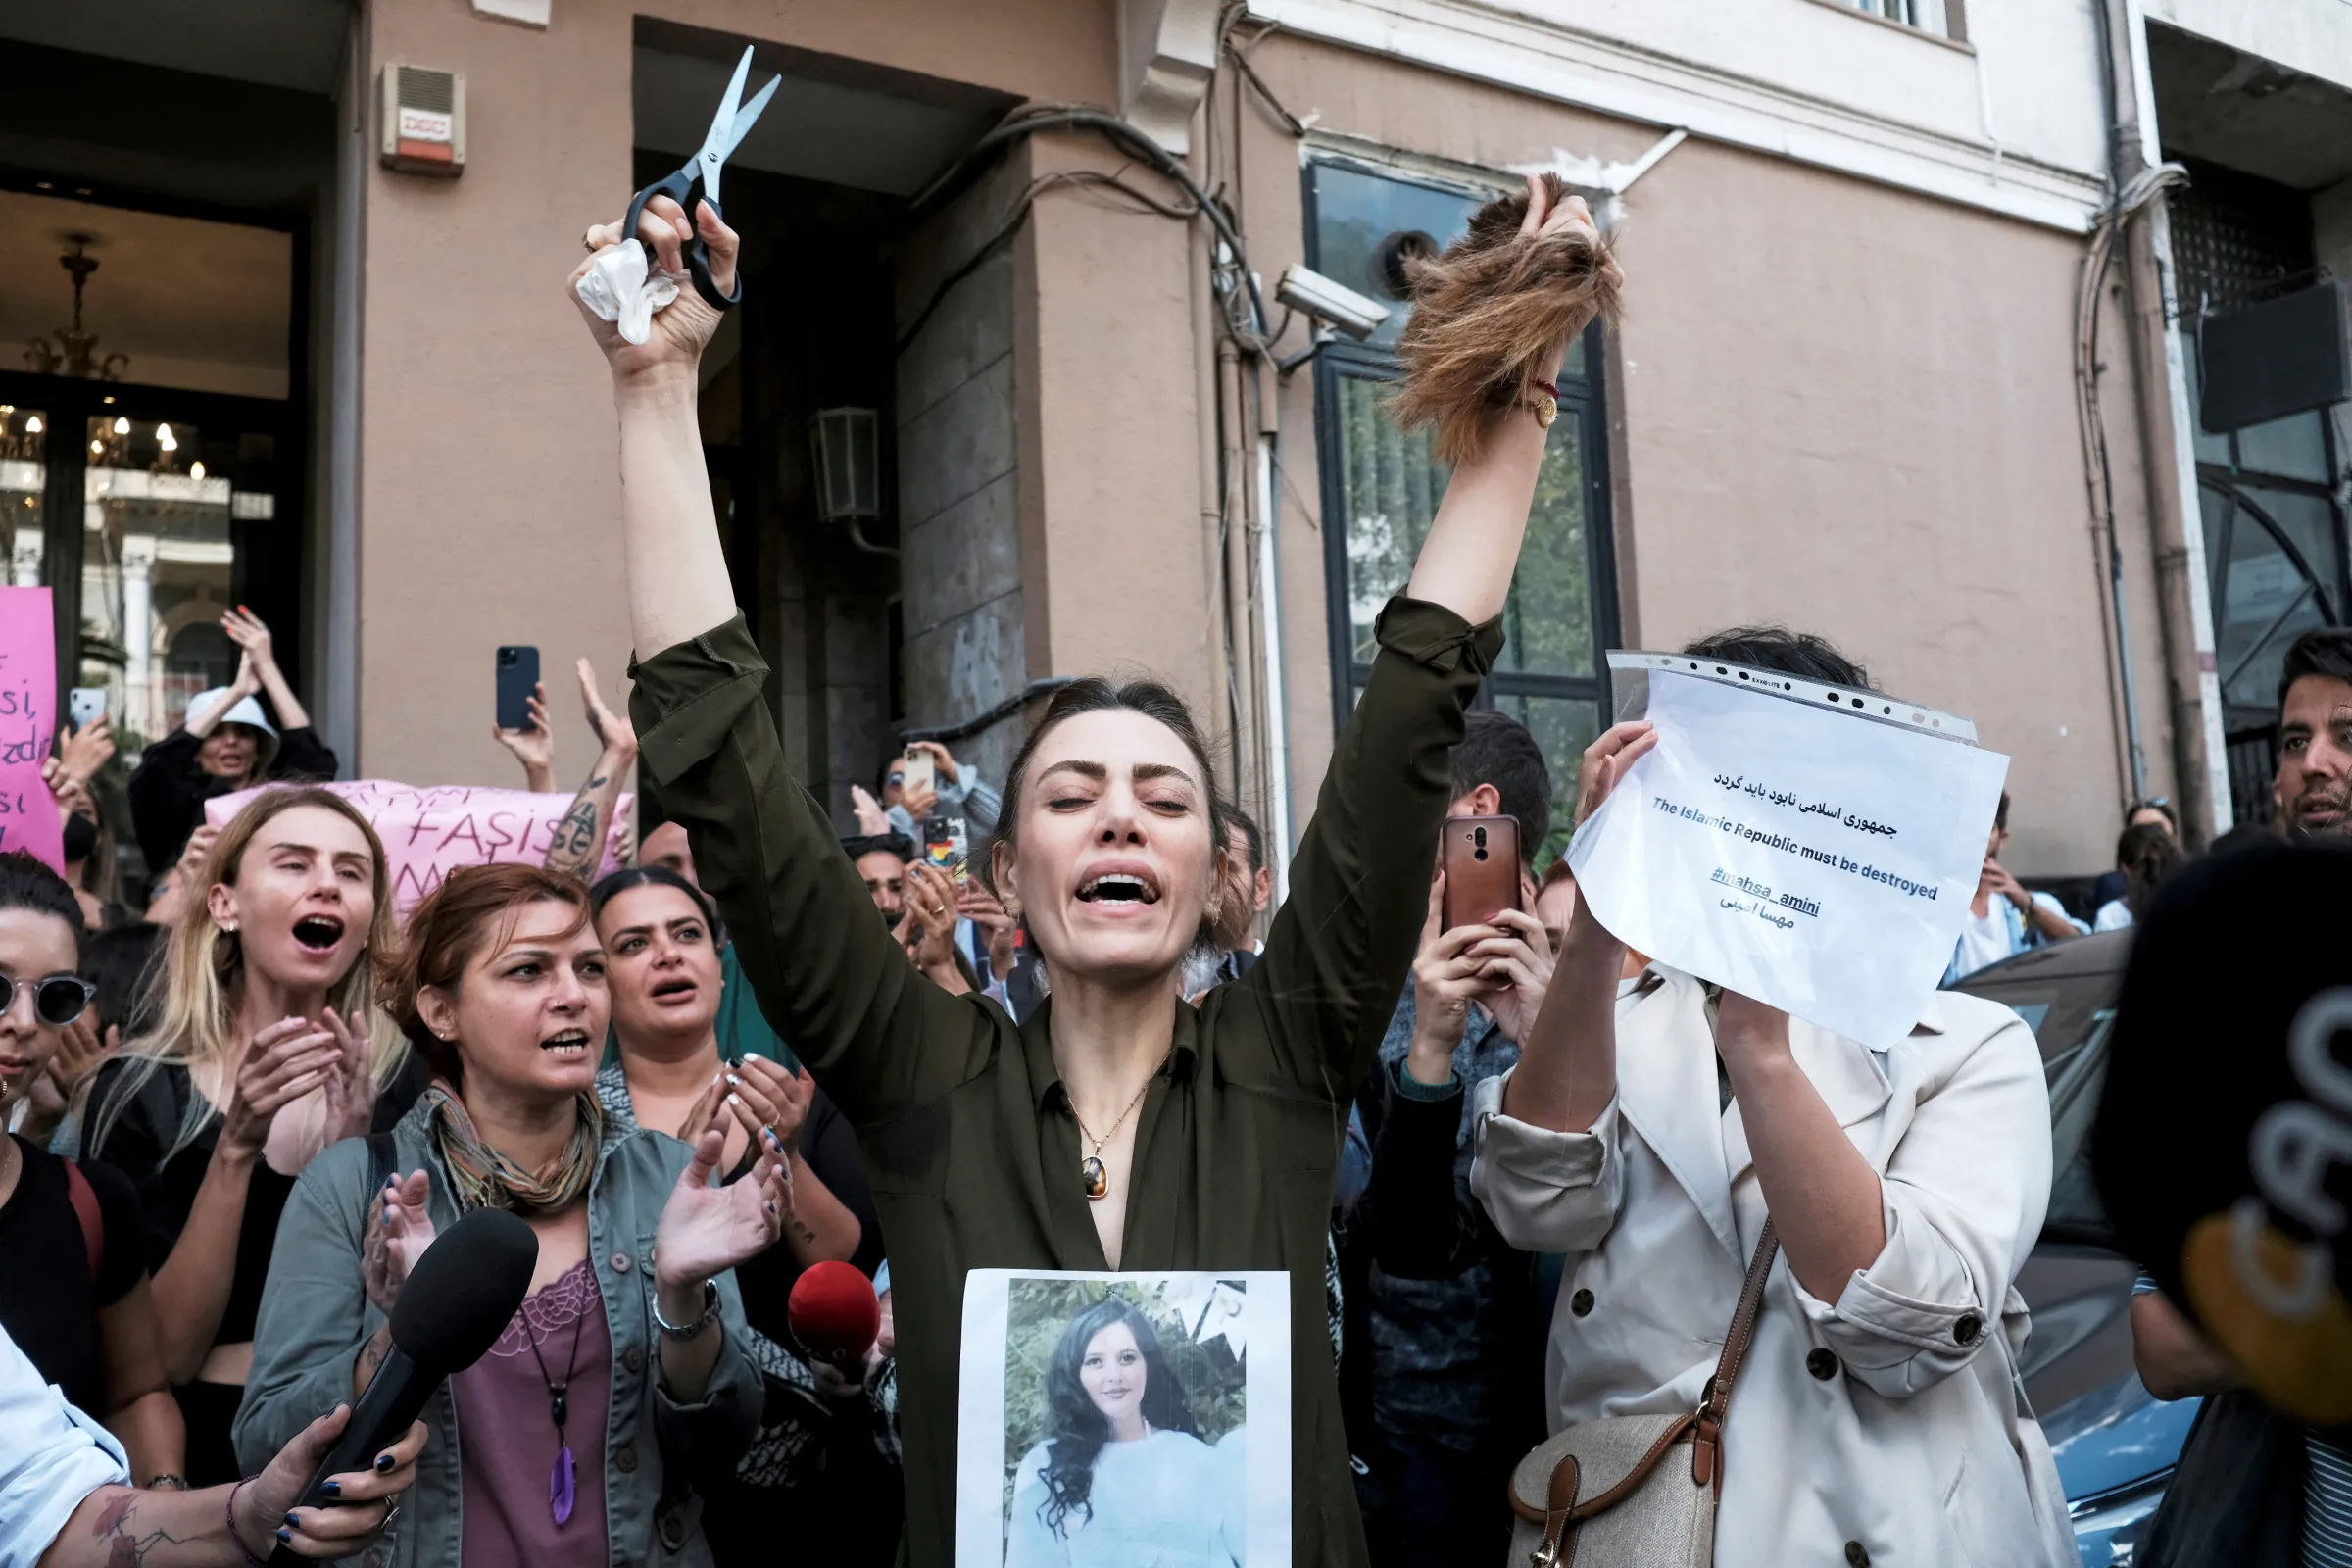 Nasibe Samsaei, an Iranian woman living in Turkey, reacts after she cut her hair during a protest following the death of Mahsa Amini, outside the Iranian consulate in Istanbul, Turkey, September 21